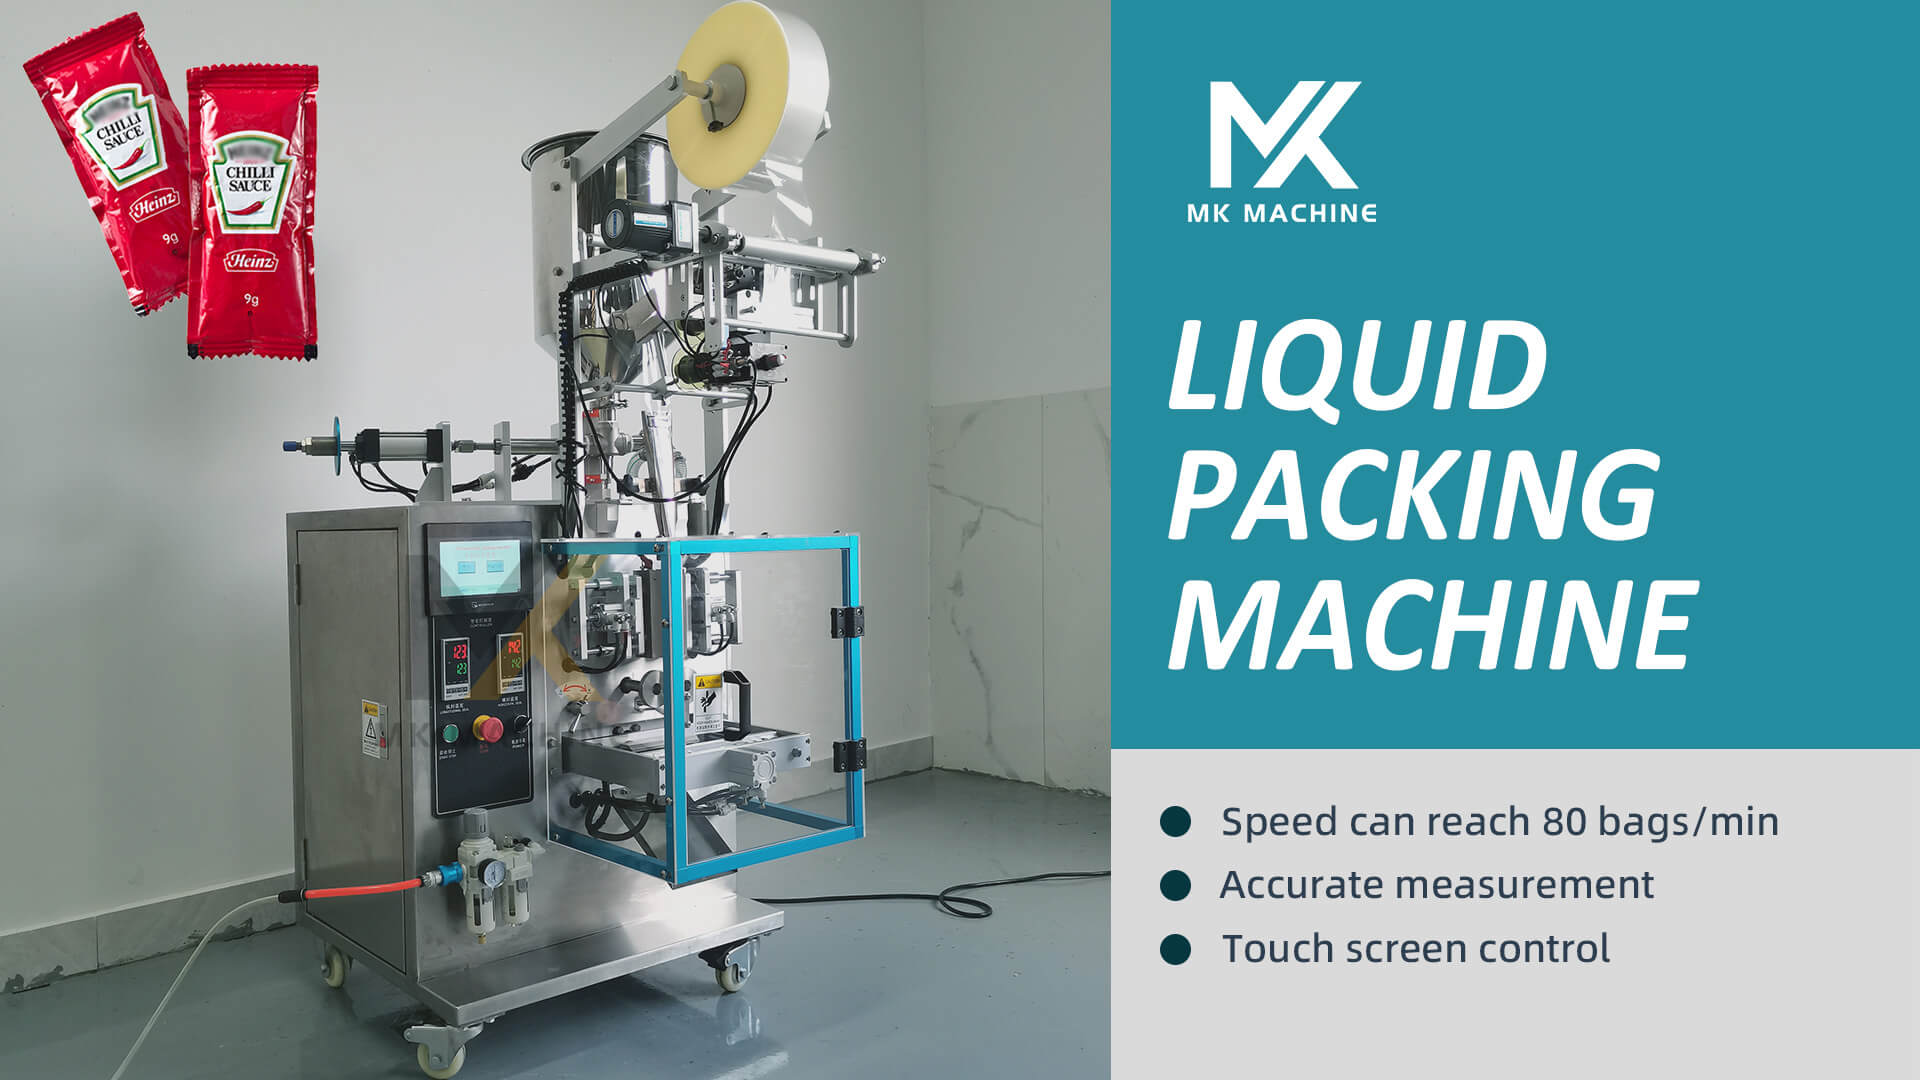 Automatic liquid packaging machine | Suitable for honey, ketchup, soy sauce, shower gel, shampoo